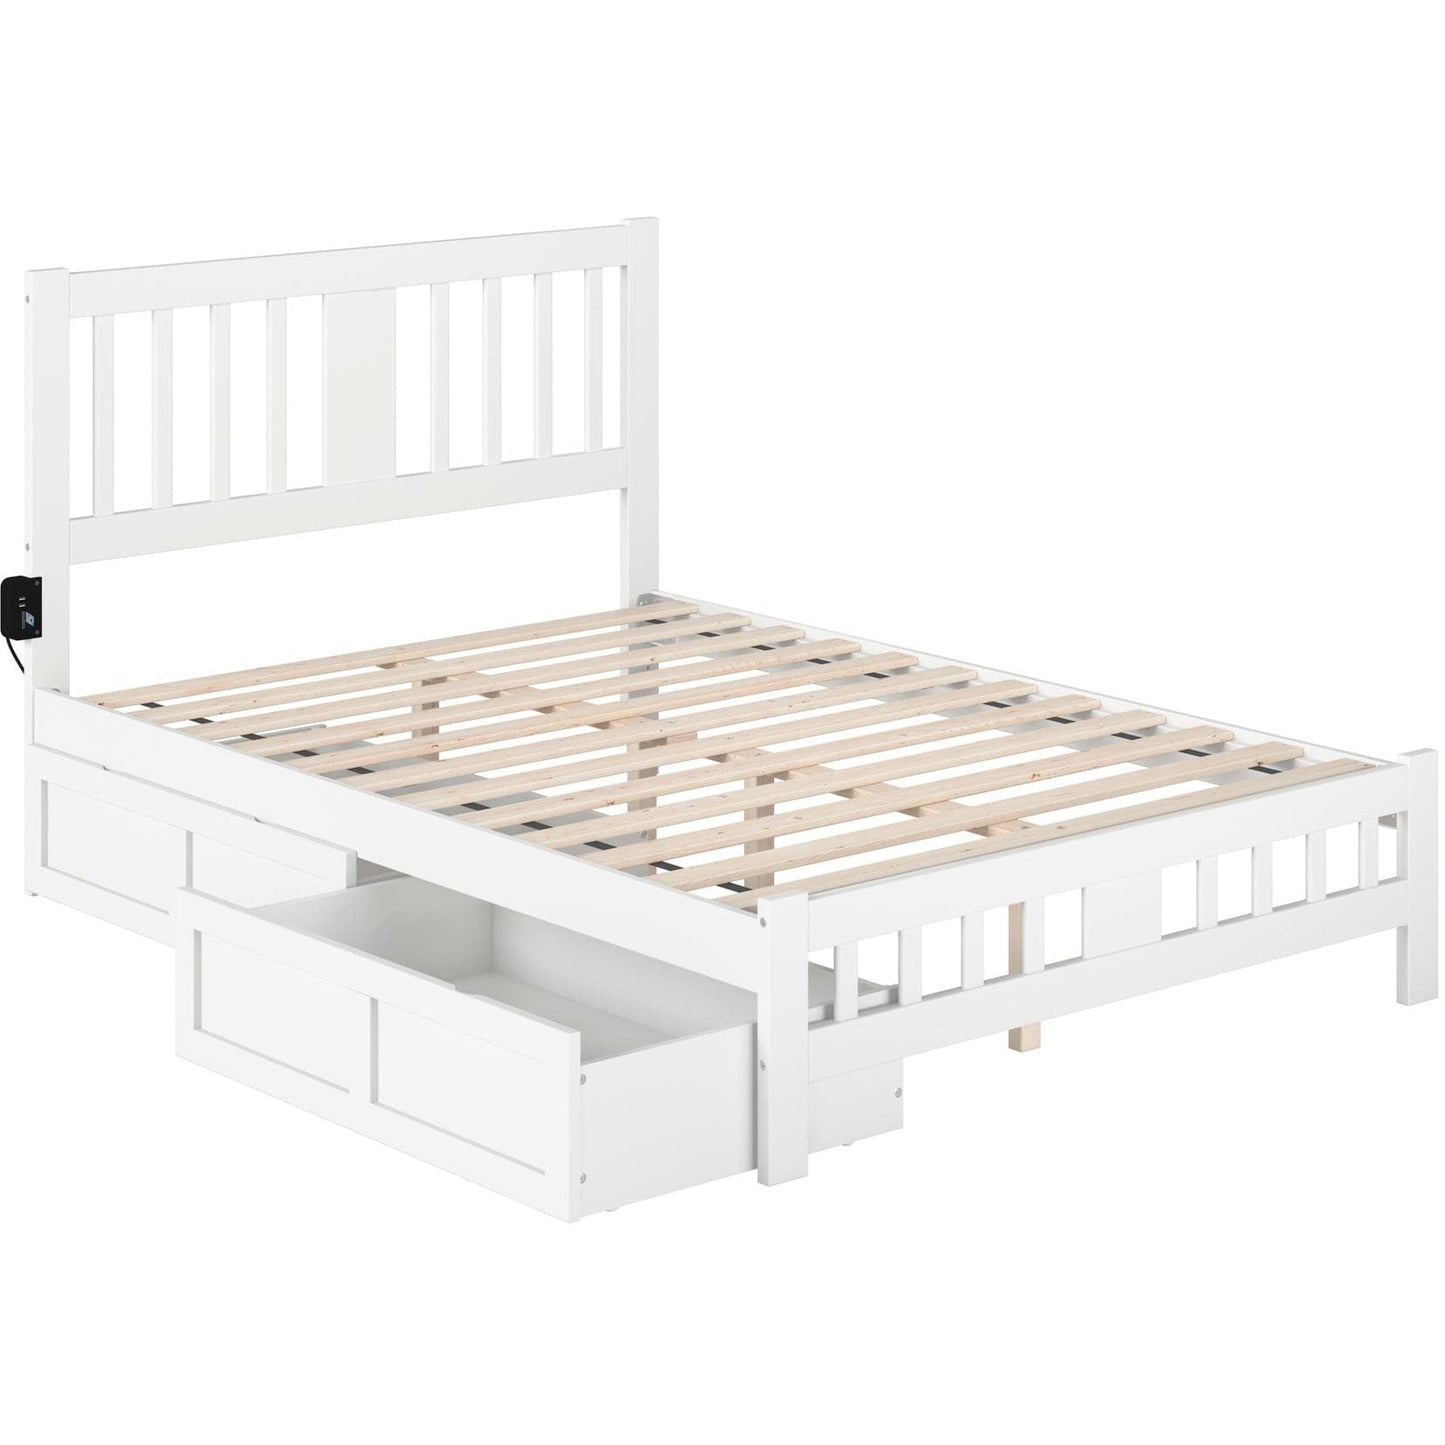 AFI Furnishings Tahoe Full Bed with Footboard and 2 Drawers in White AG8963332